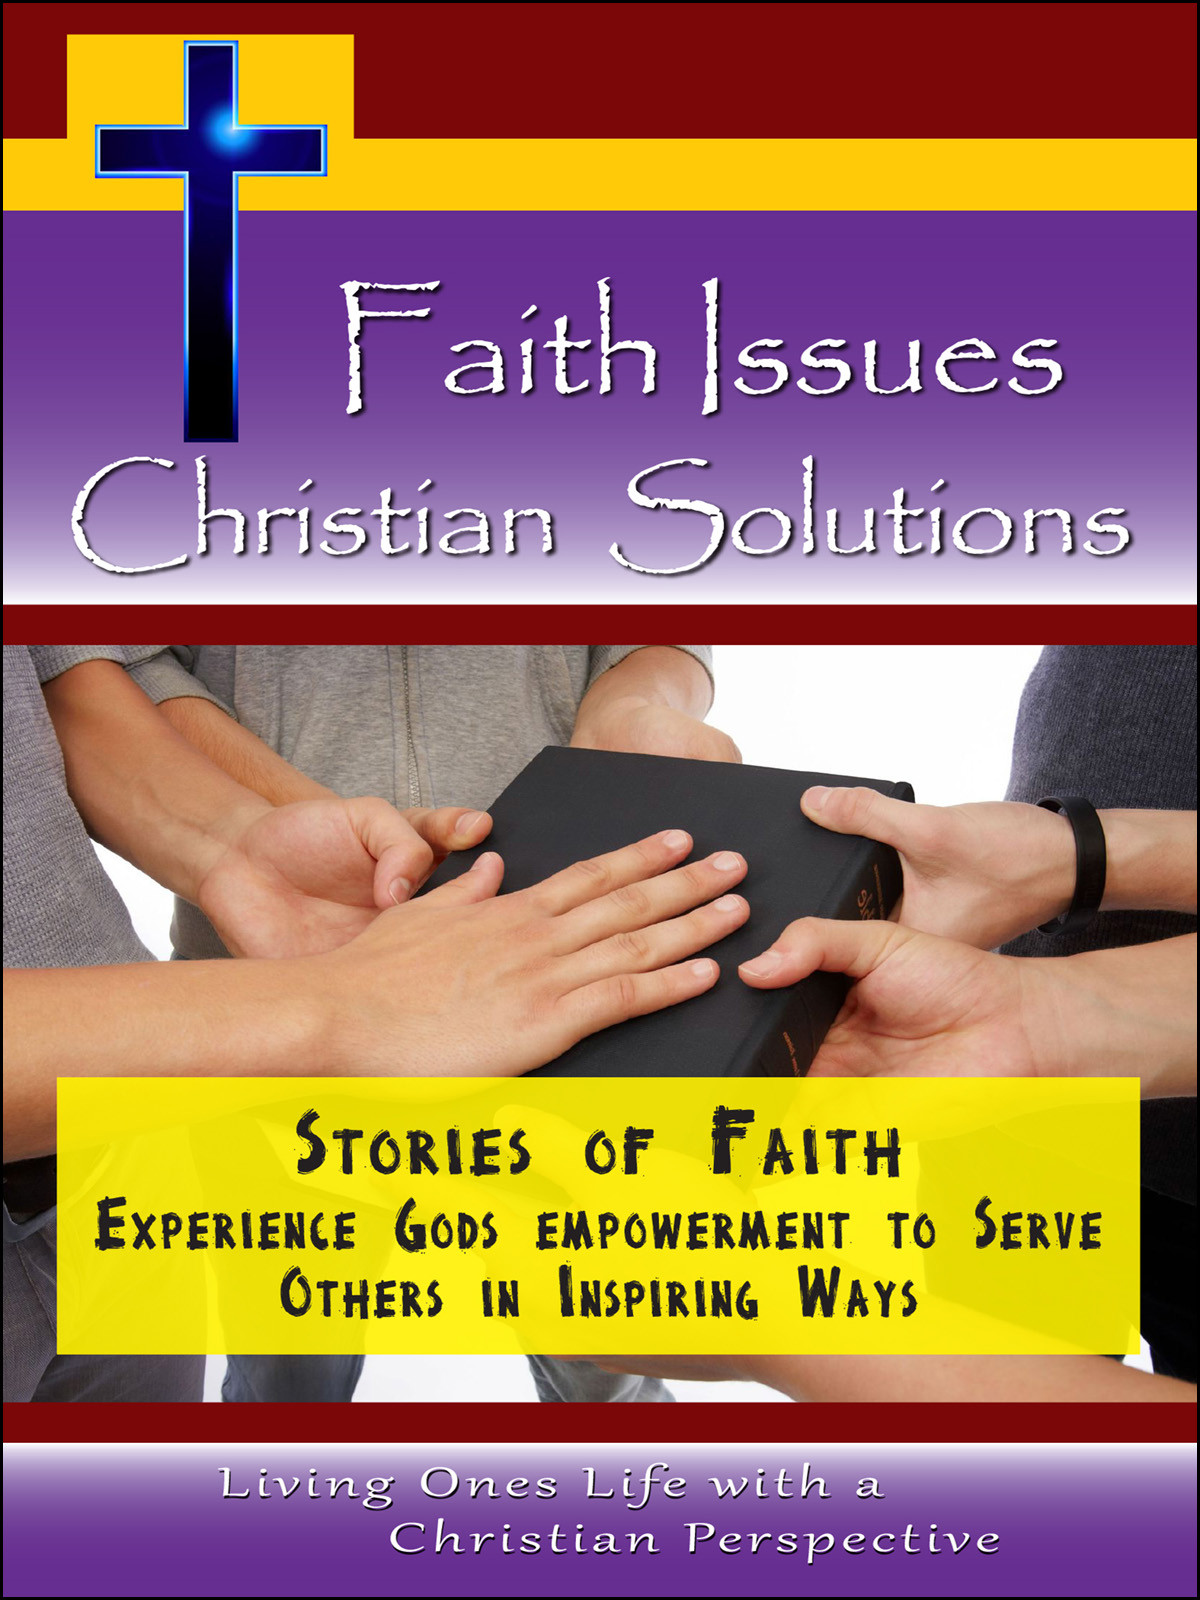 CH10038 - Stories of Faith Experience Gods empowerment to Serve Others in Inspiring Ways